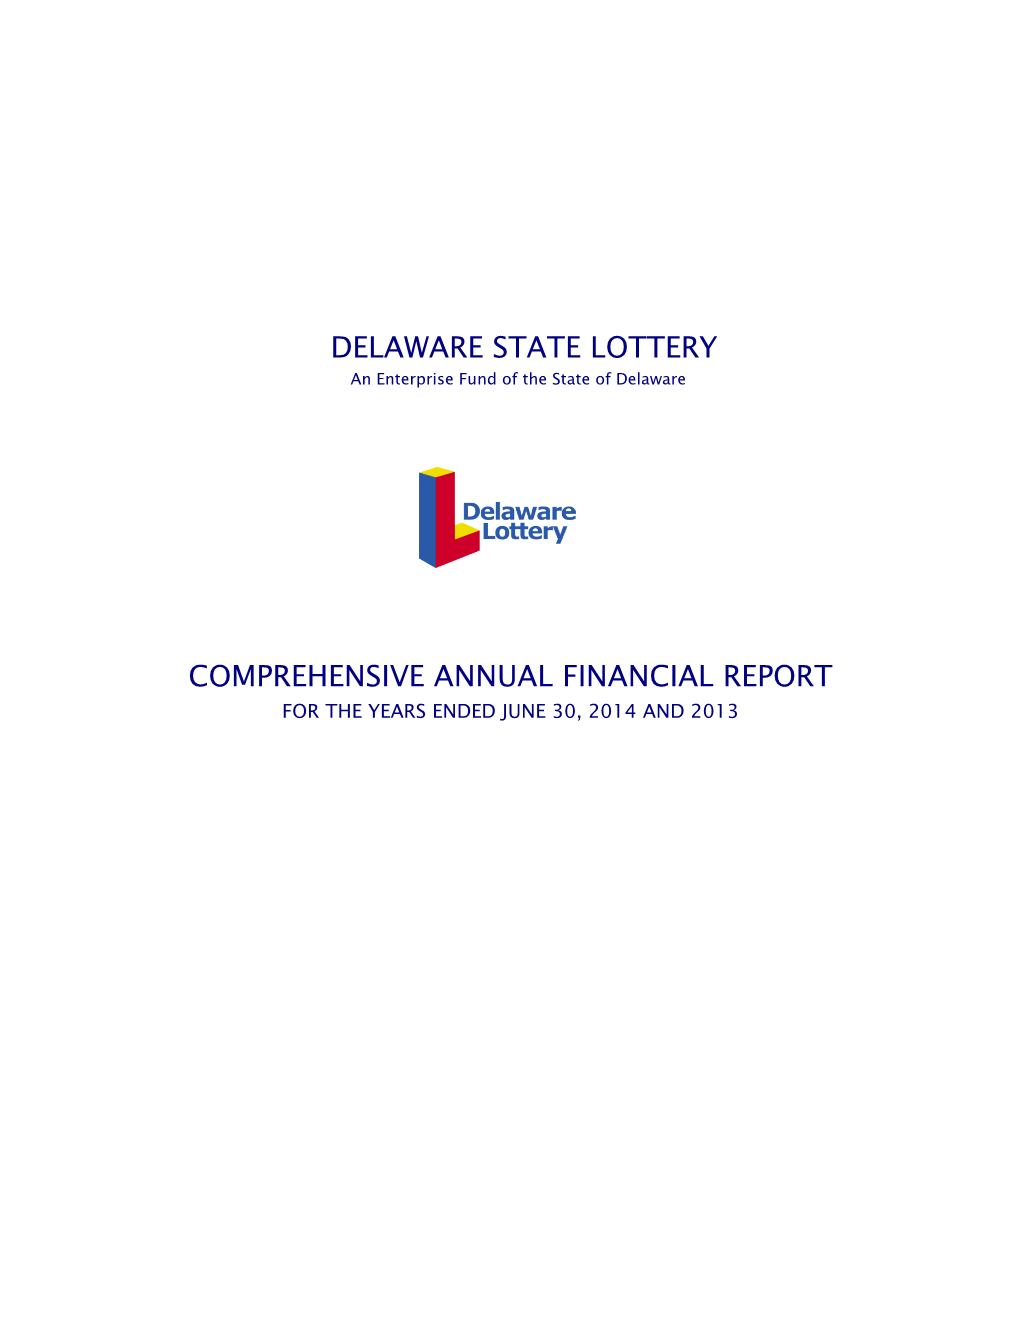 Delaware State Lottery Comprehensive Annual Financial